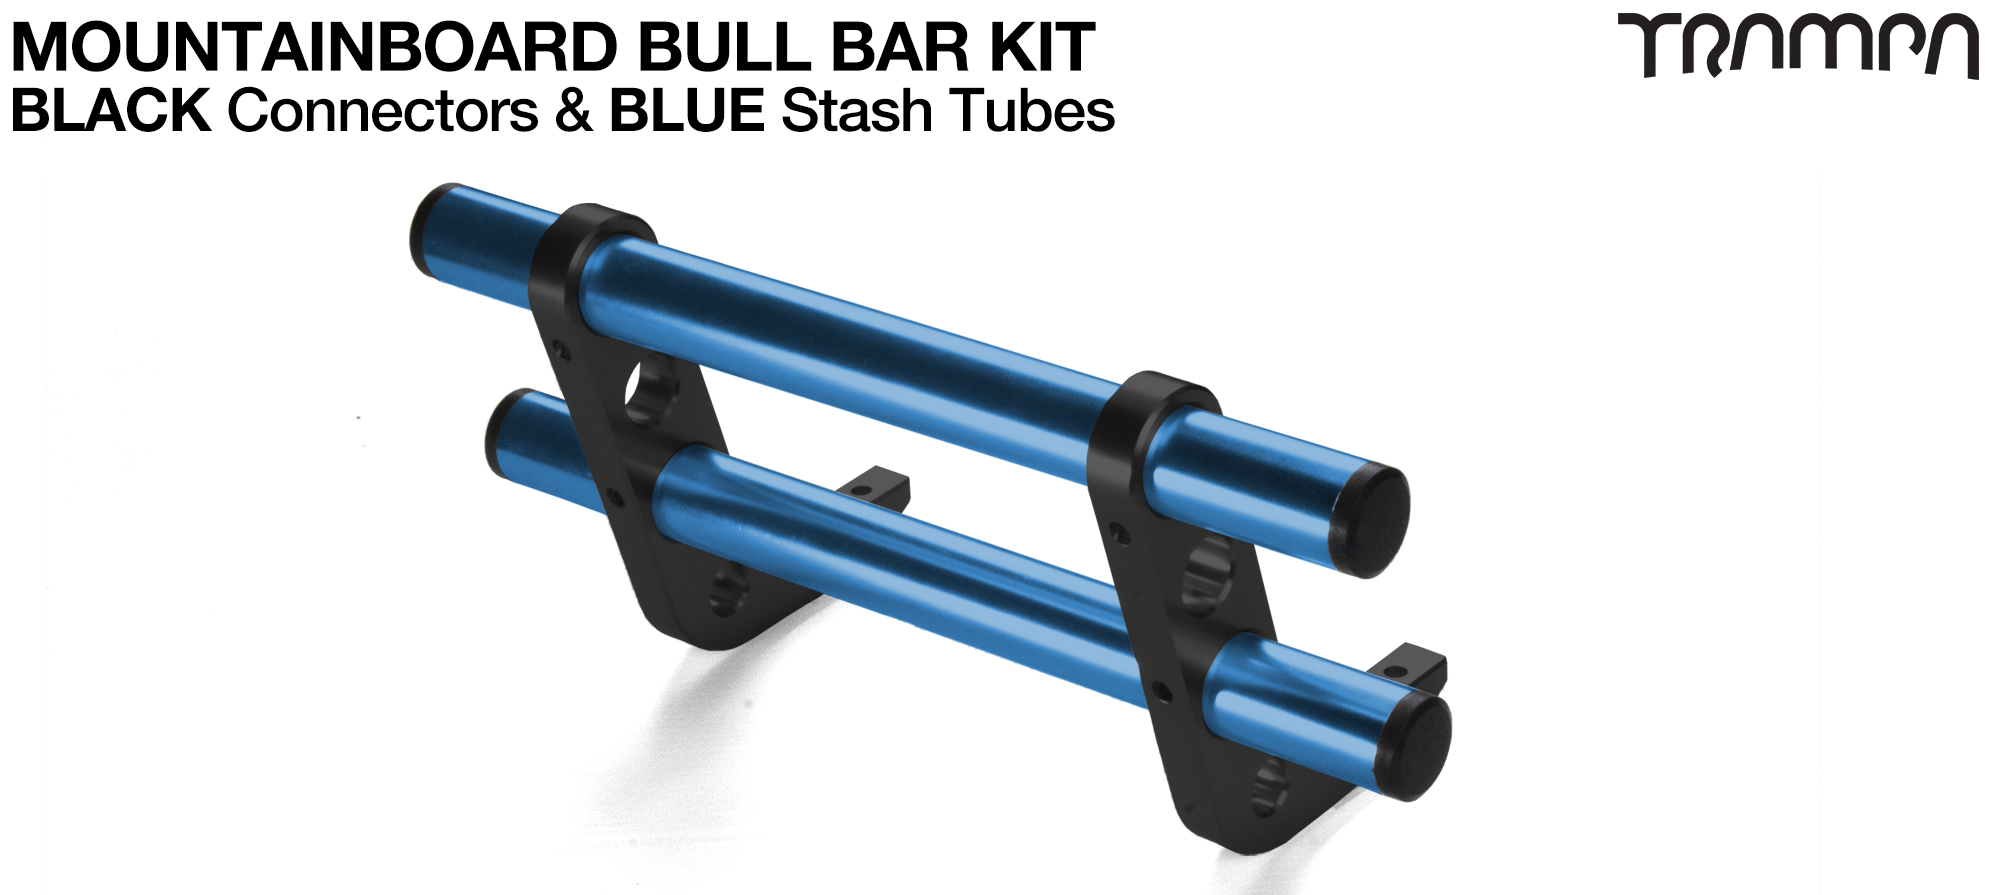 BLACK Uprights & BLUE Crossbar BULL BARS for MOUNTAINBOARDS using T6 Heat Treated CNC'd Aluminum Clamps, Hollow Aluminium Stash Tubes with Rubber end bungs